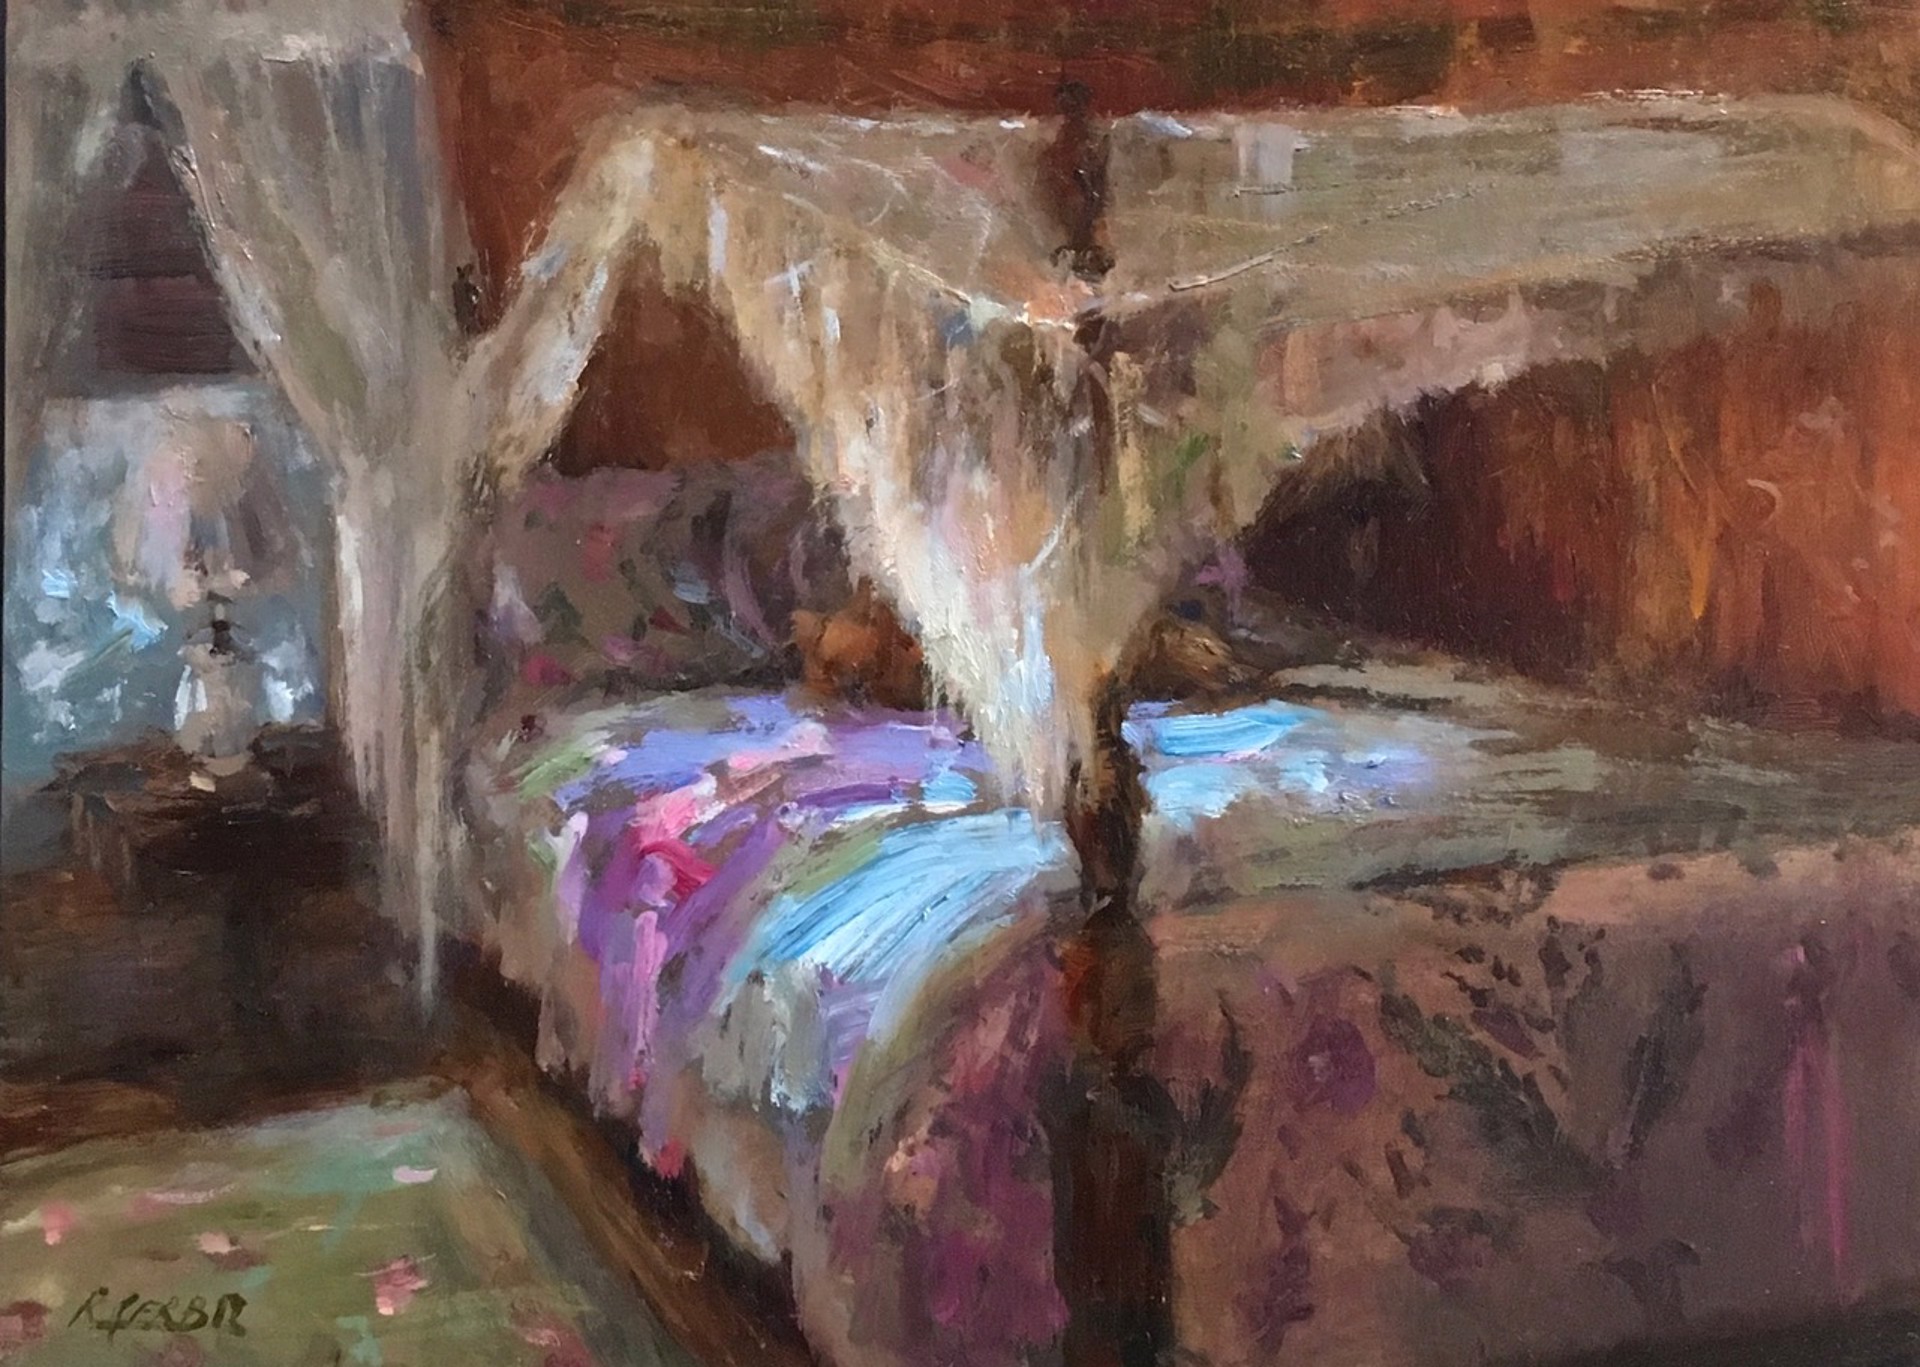 "The Dog's Bedroom" original oil painting by Rosanne Cebro.